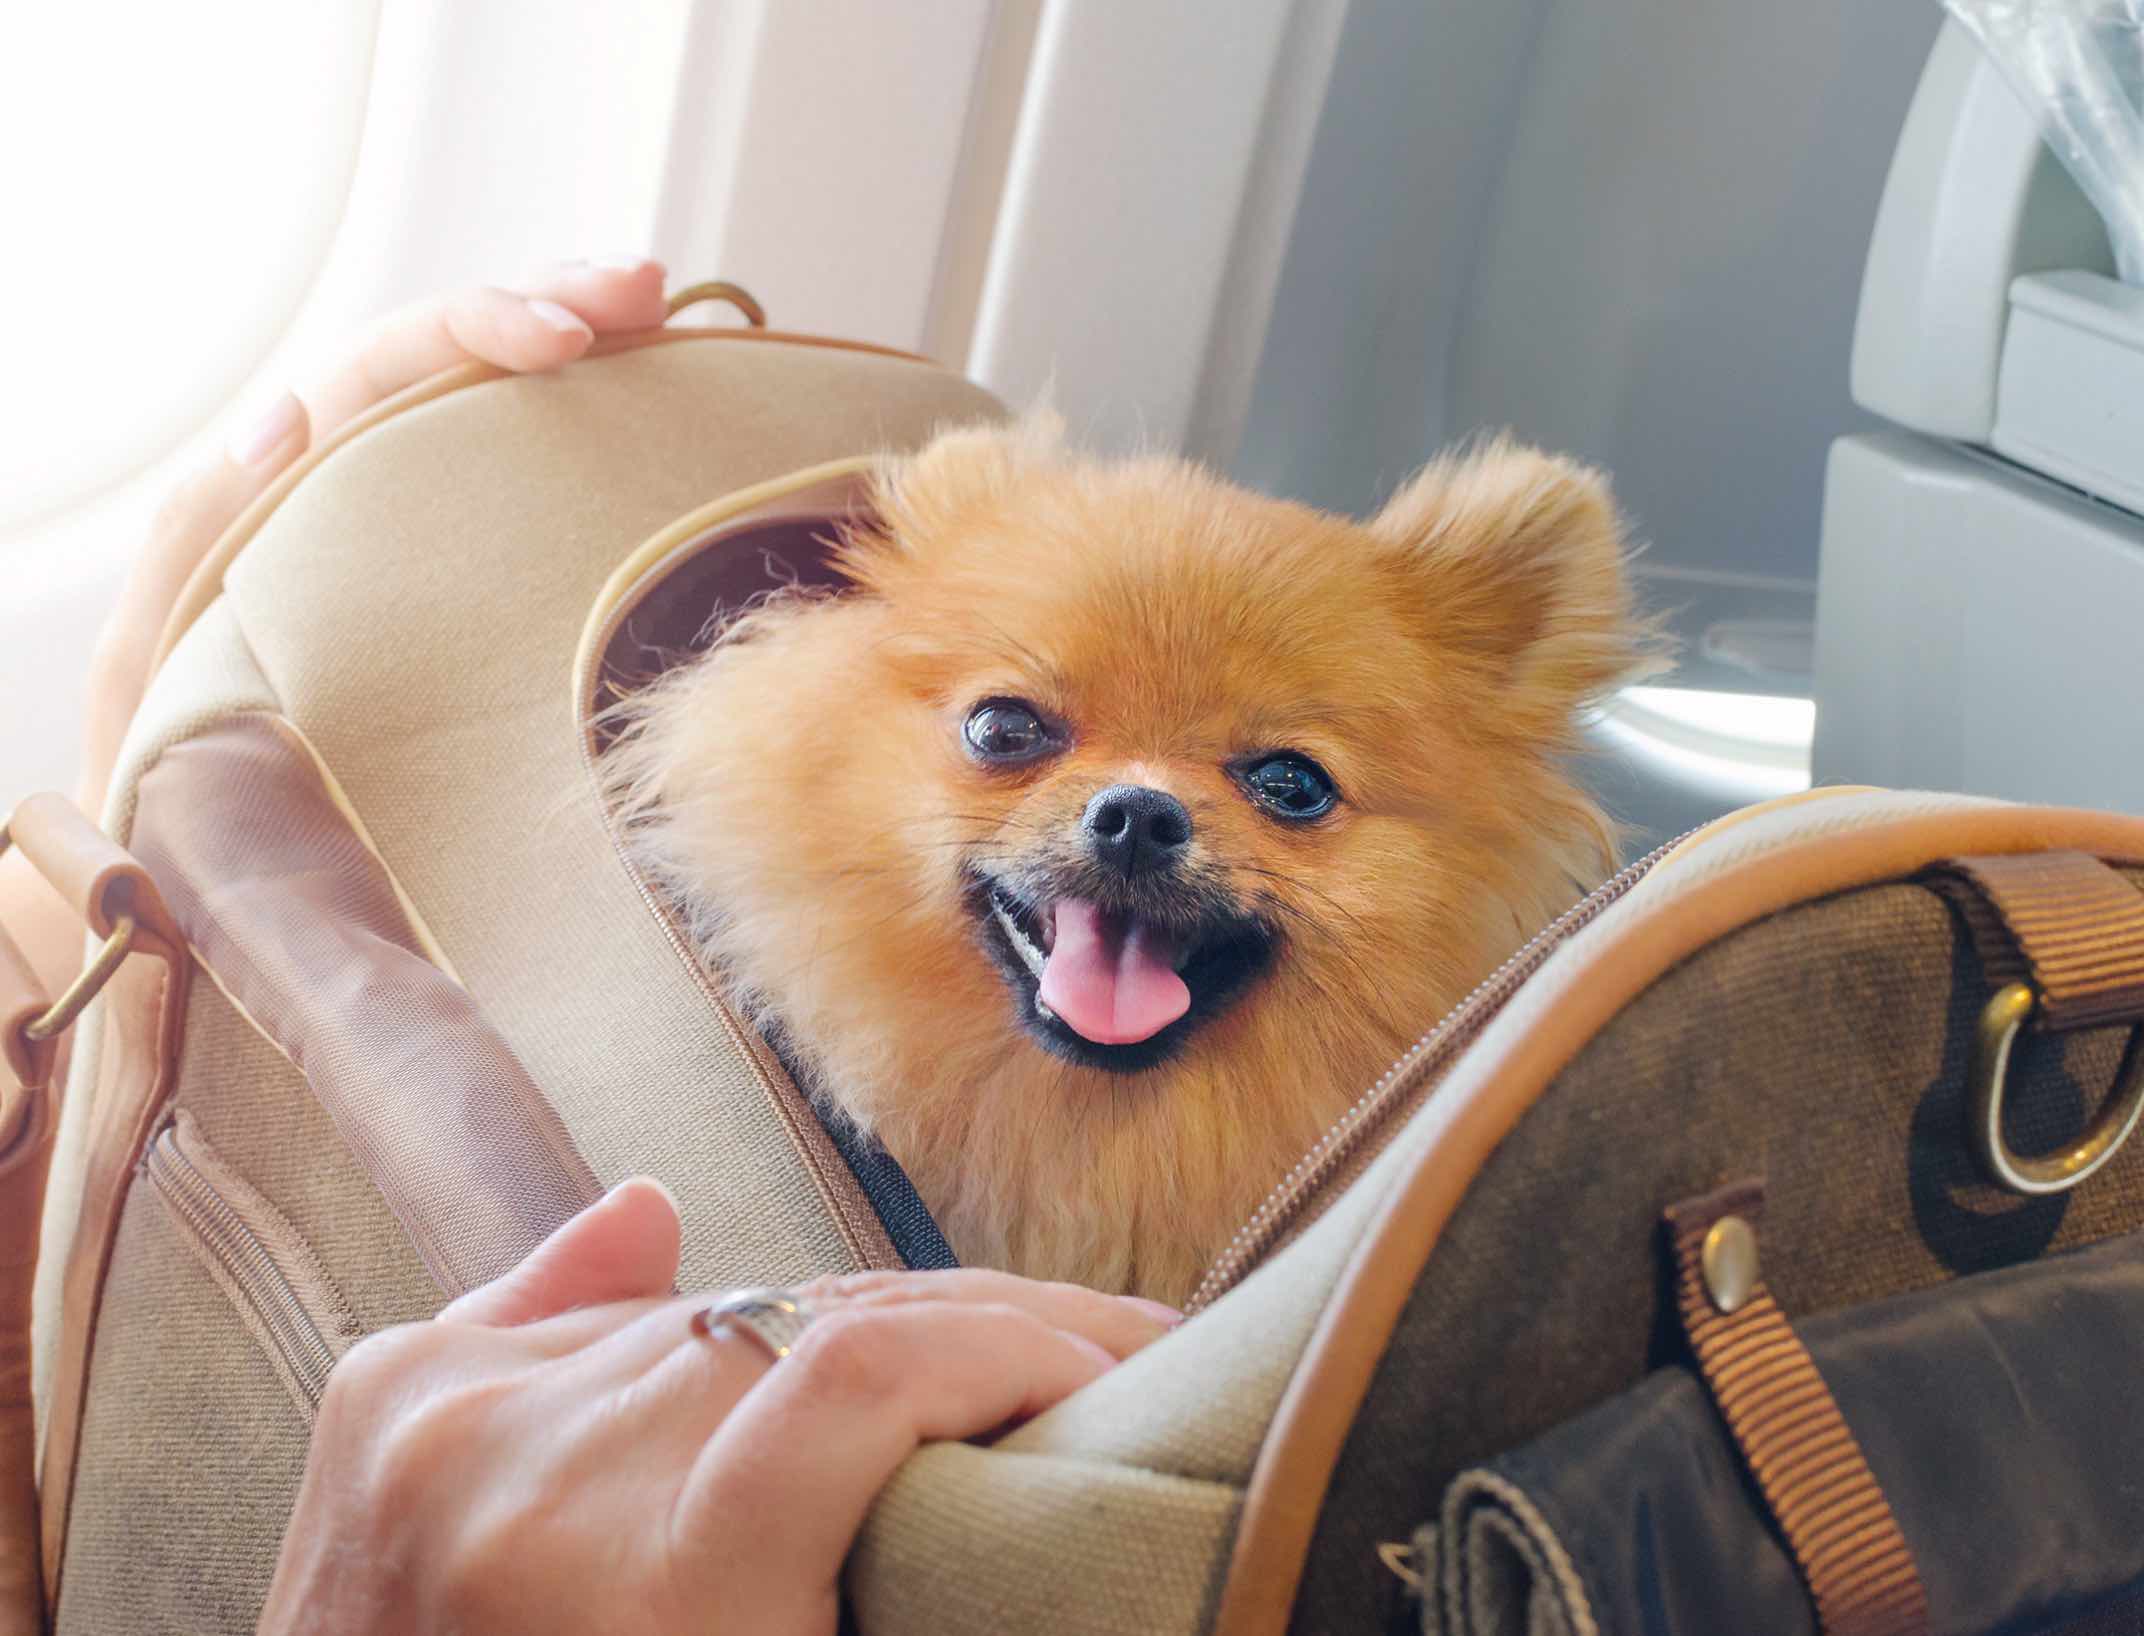 This cute dog is ready for a plane ride thanks to tips with Dog Training Elite in Atlanta.